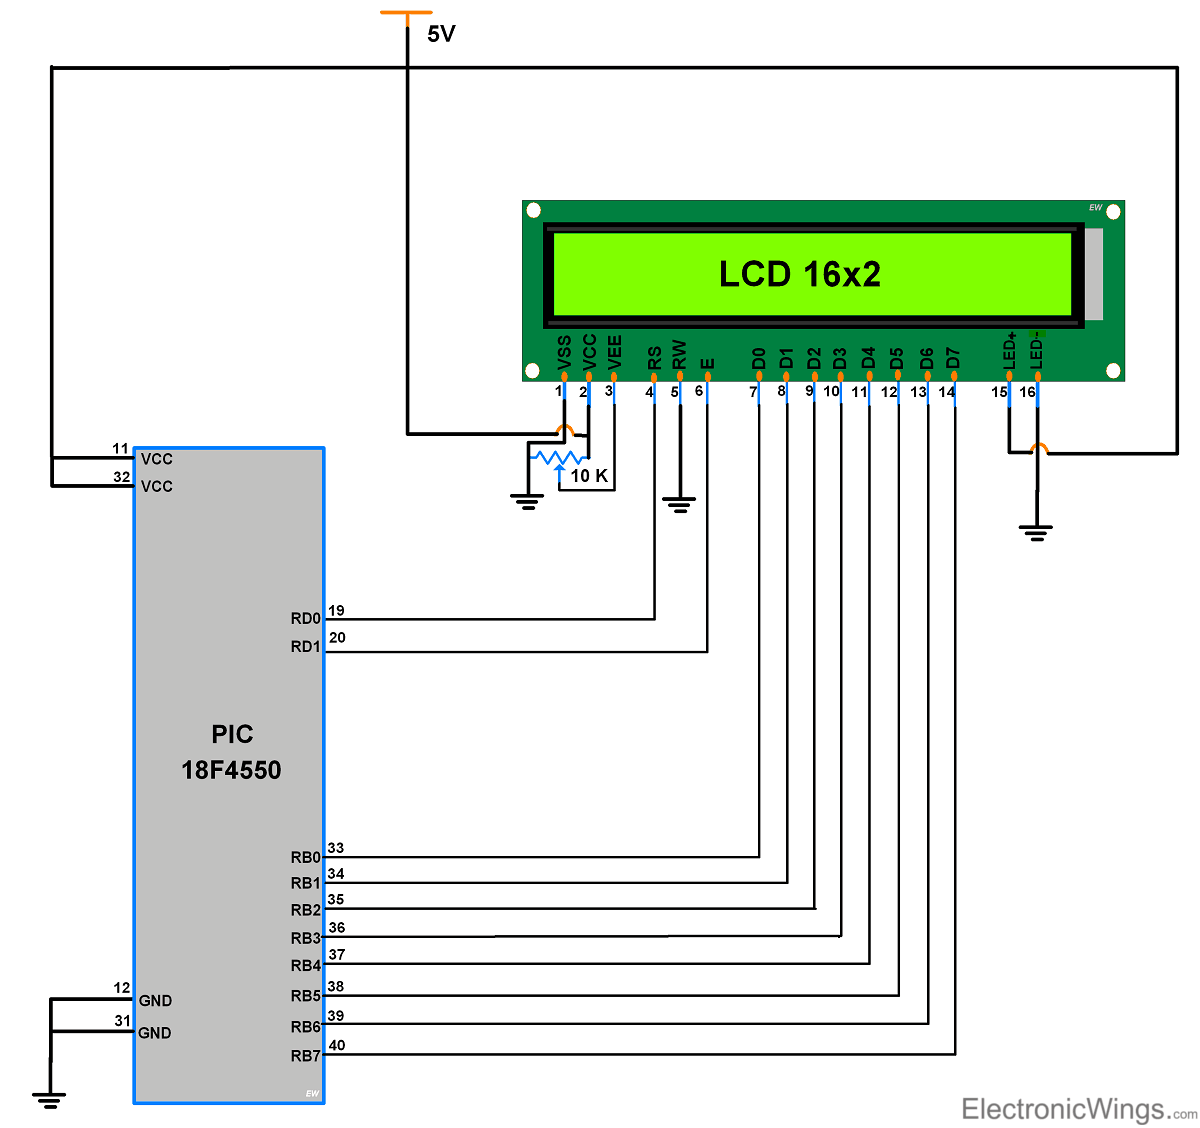 Interfacing LCD16x2 with PIC Microcontroller